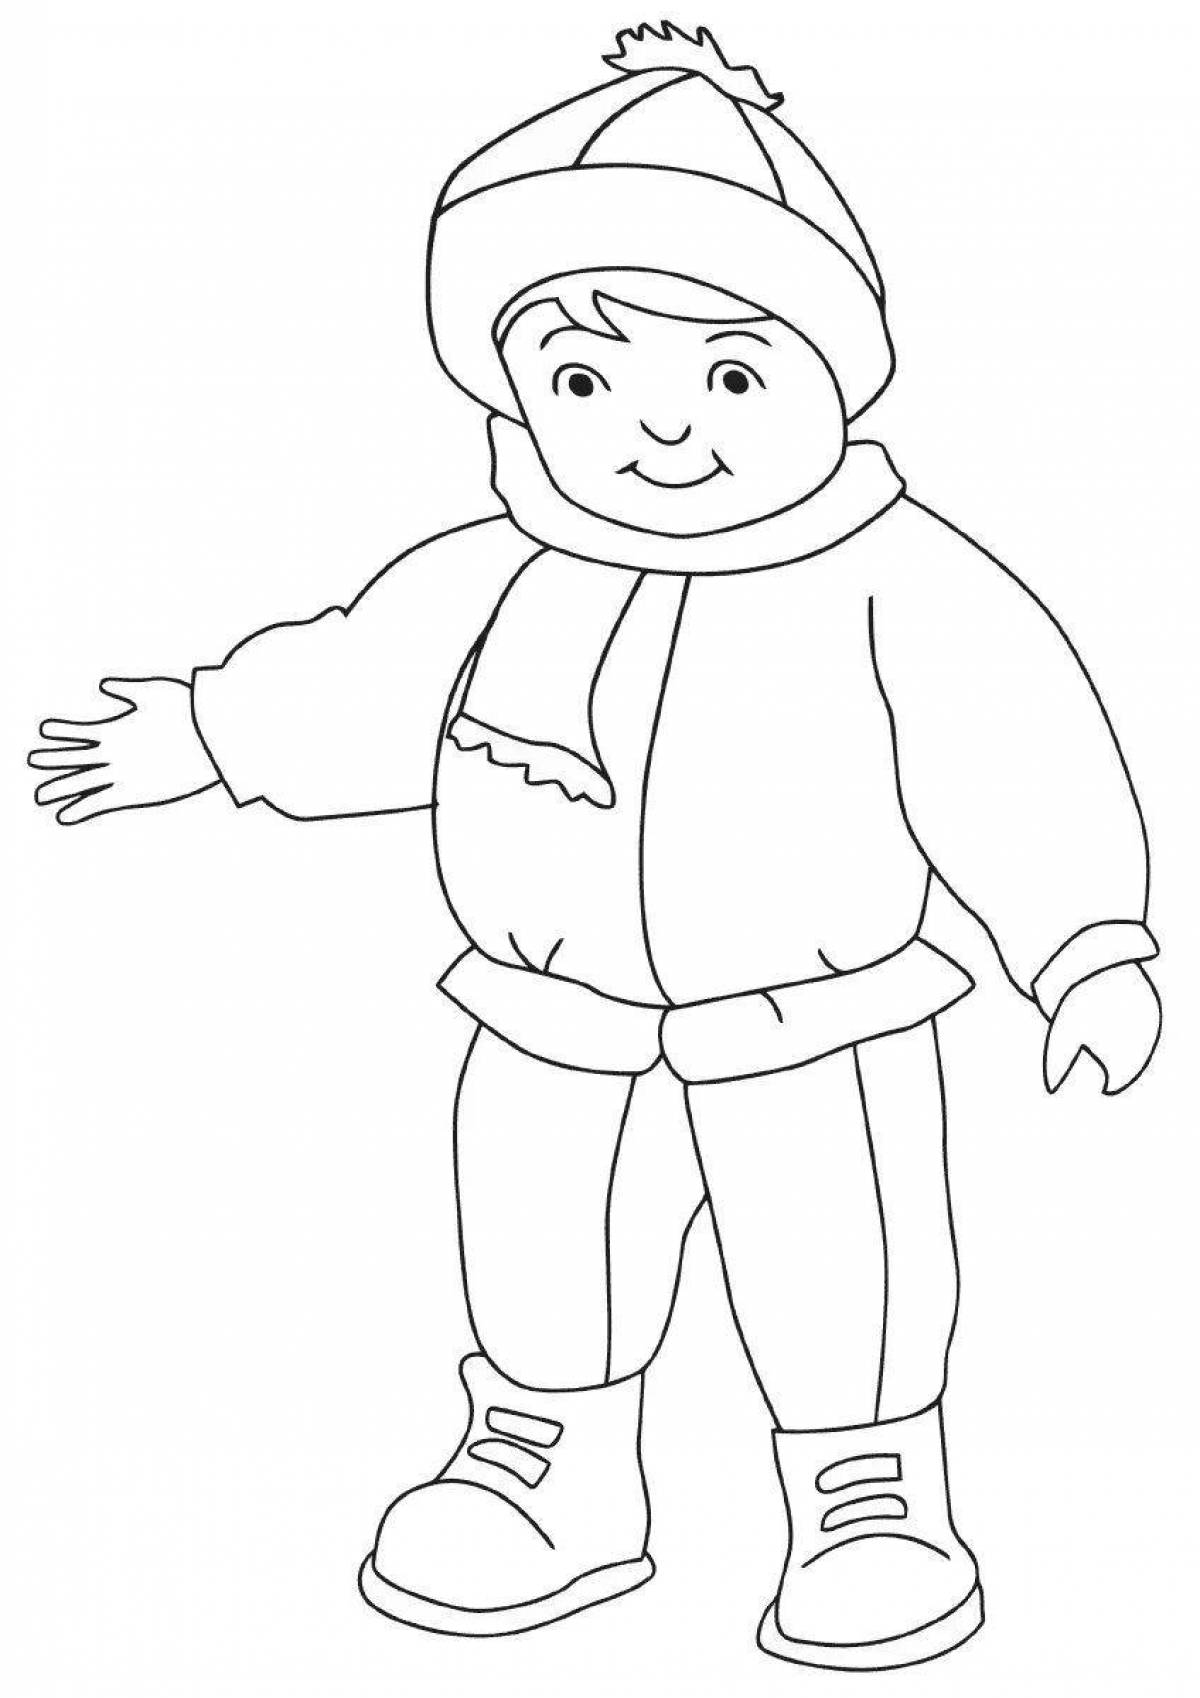 Exuberant coloring doll in winter clothes